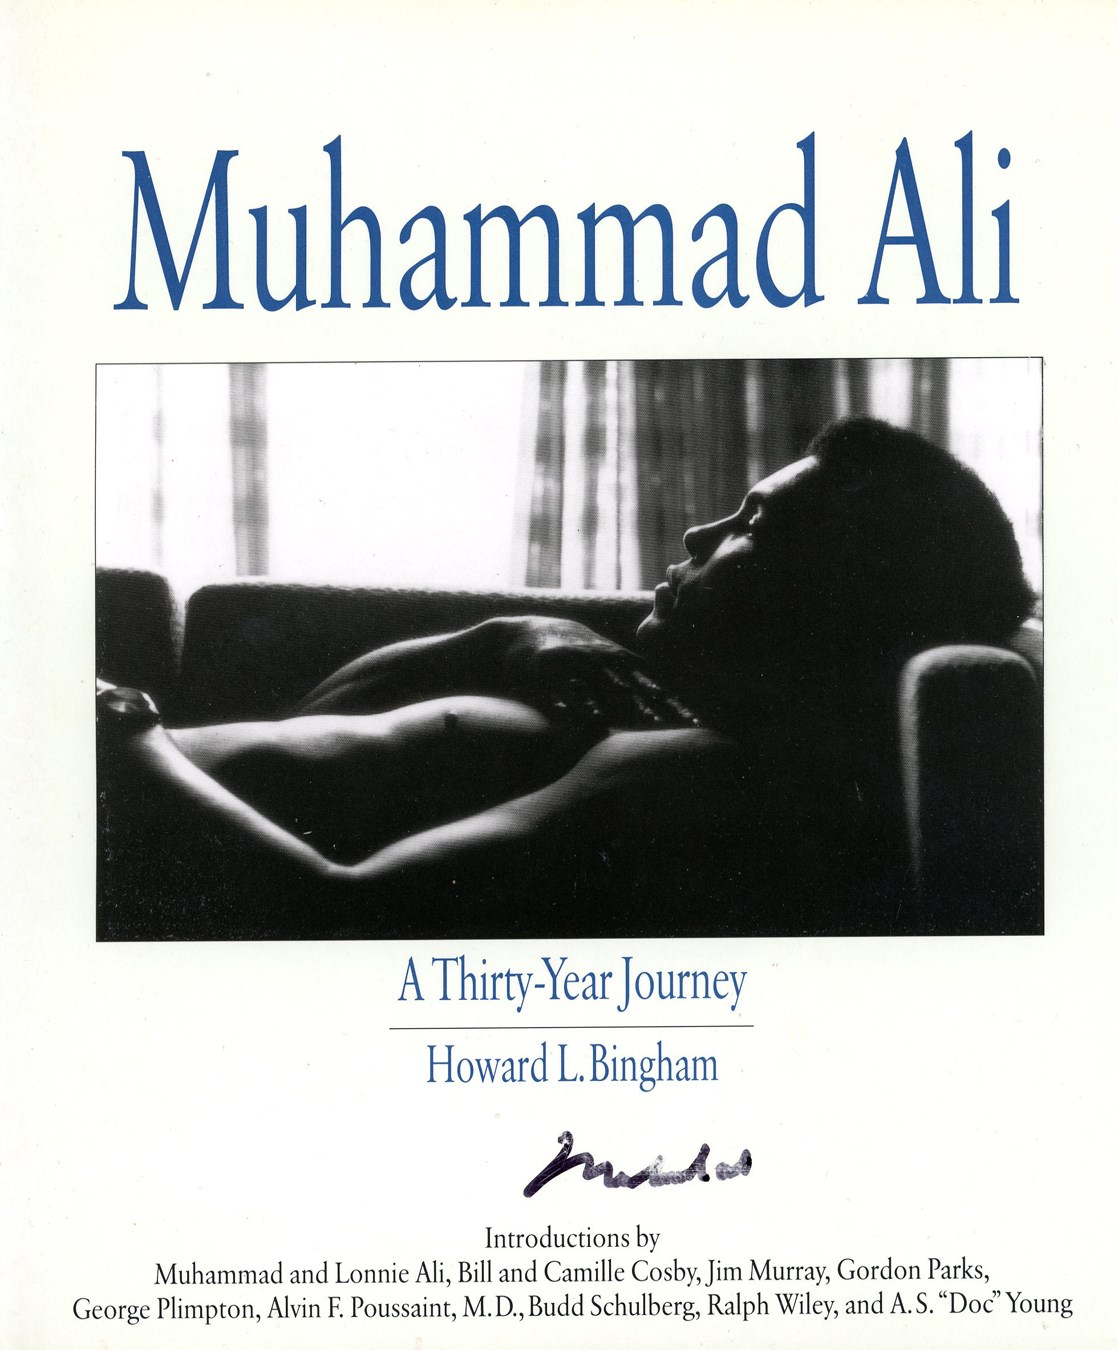 Muhammad Ali & Boxing - 1993 "Muhammad Ali: A Thirty Year Journey" Book - Signed by Ali 8 Times (PSA/DNA)